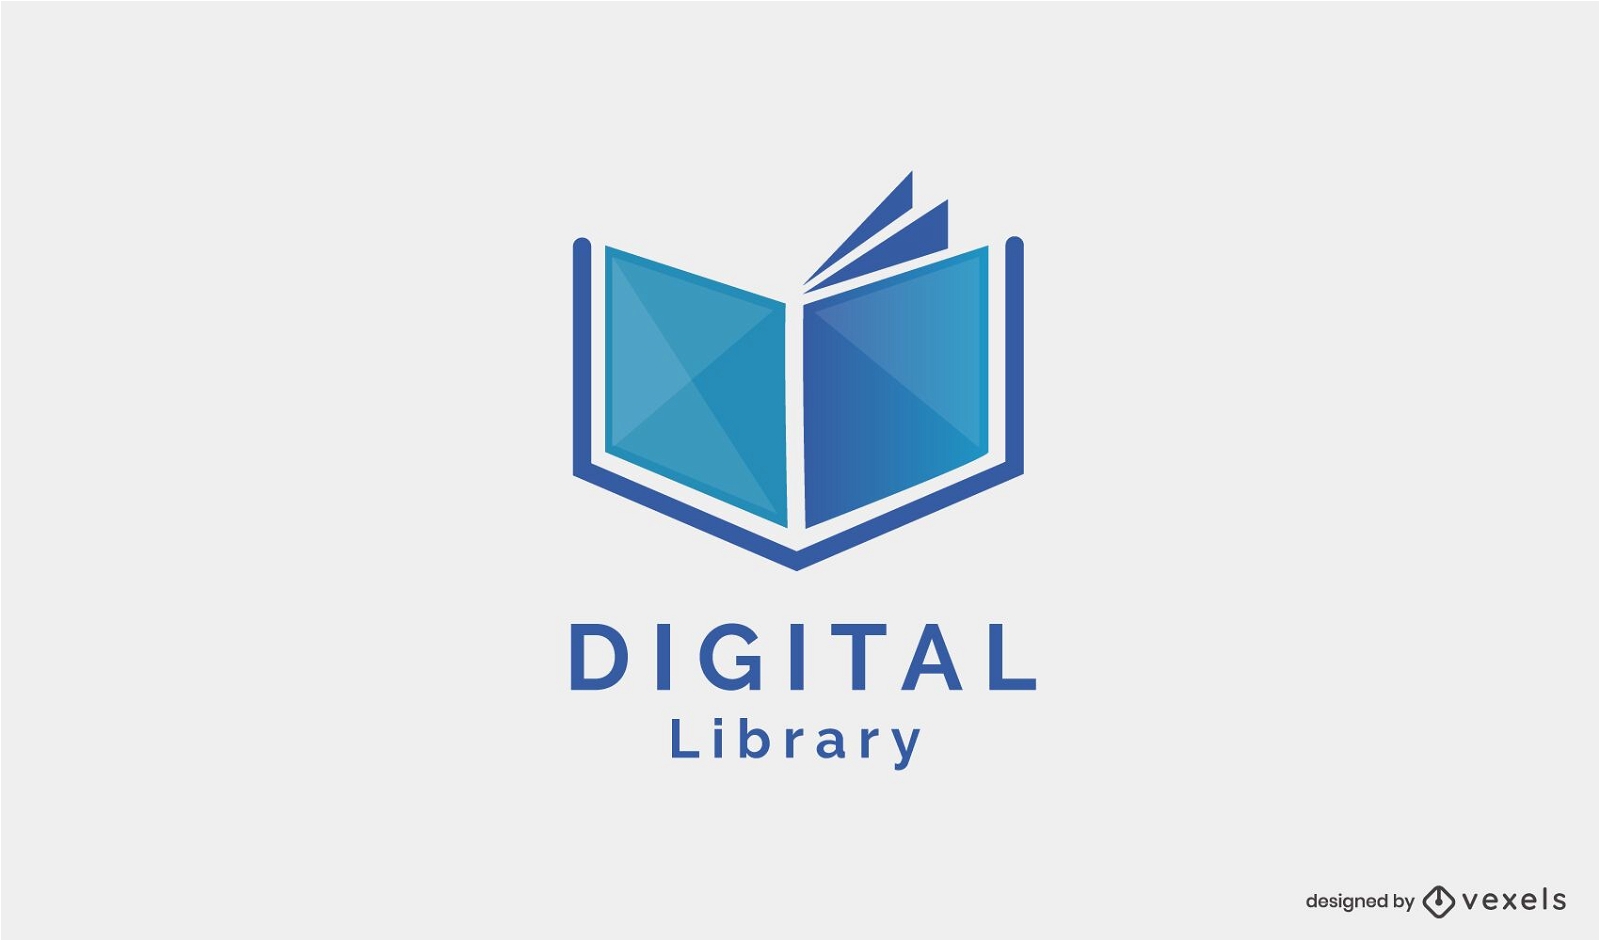 Brand New: New Logo and Identity for Toronto Public Library by Trajectory